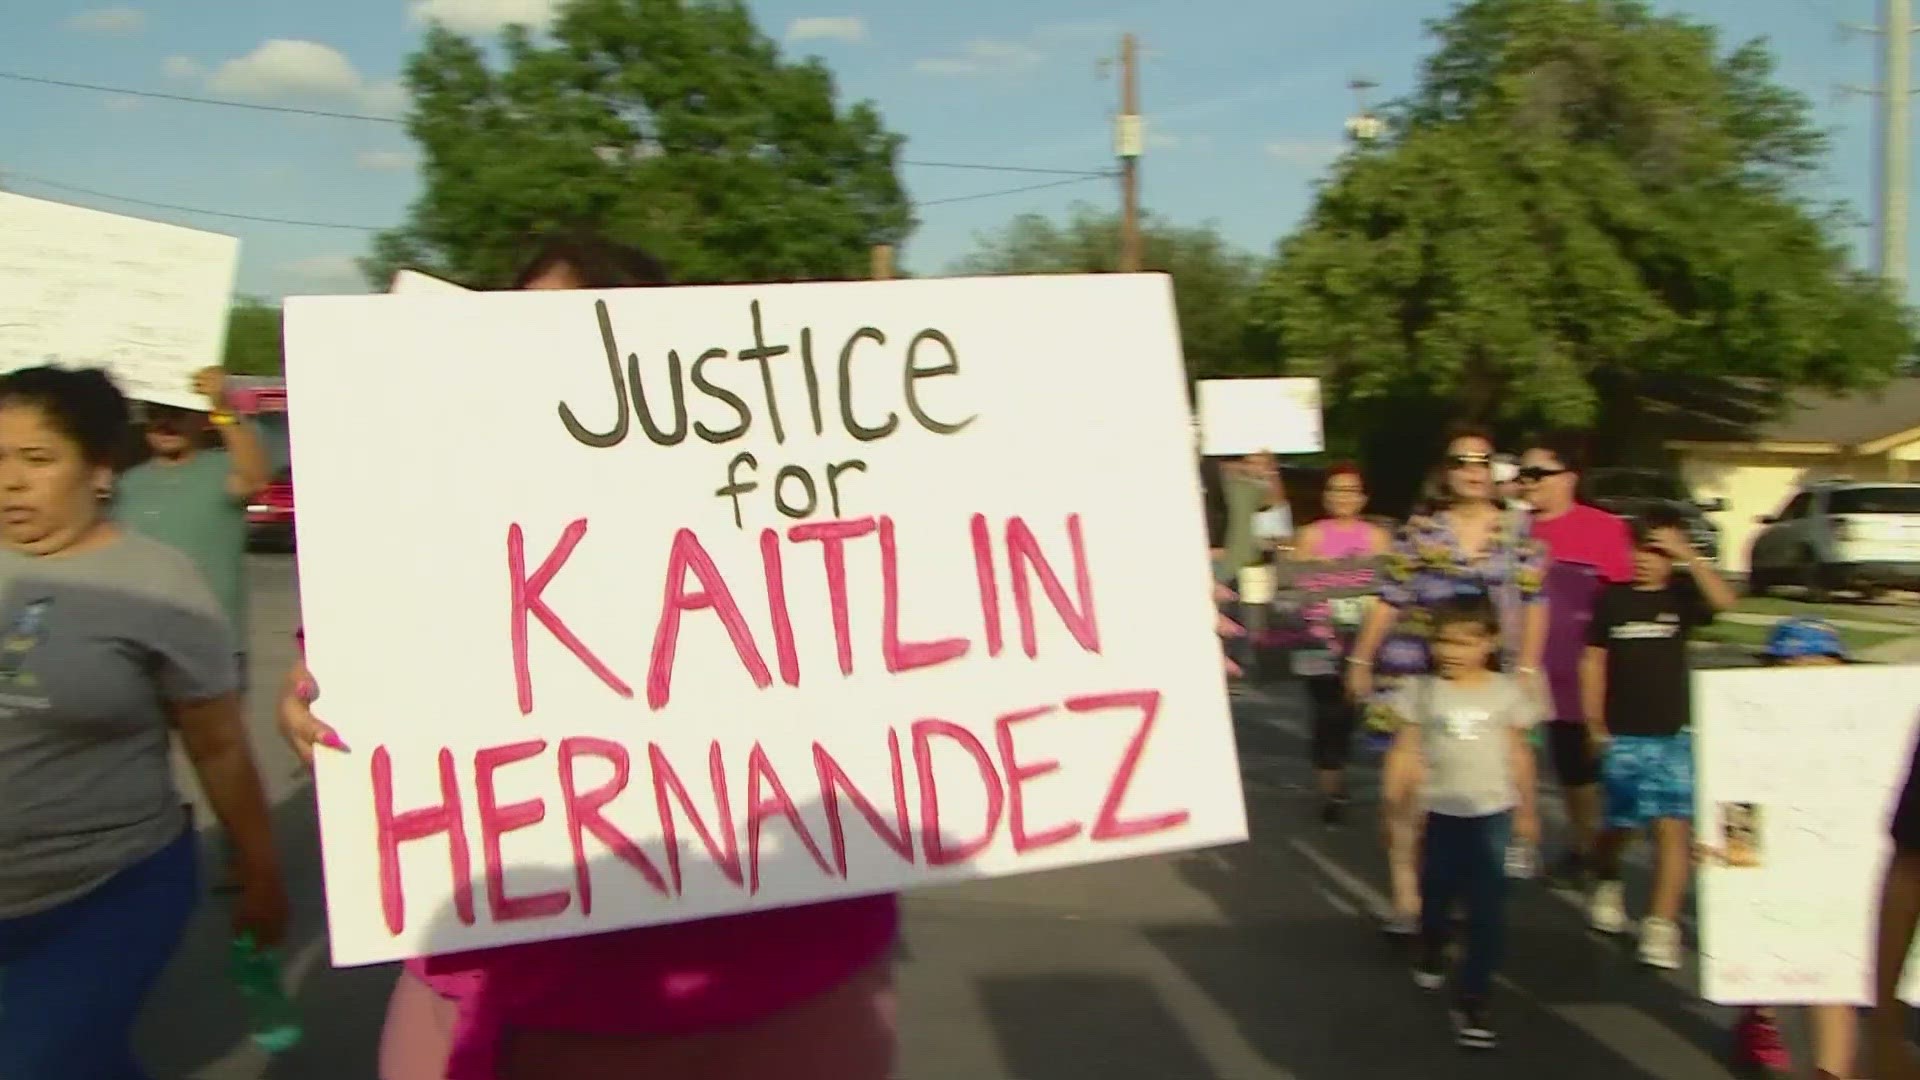 Dozens marched around the neighborhood of Kaitlin Hernandez calling for justice over a month after the teen was found strangled in a ditch.